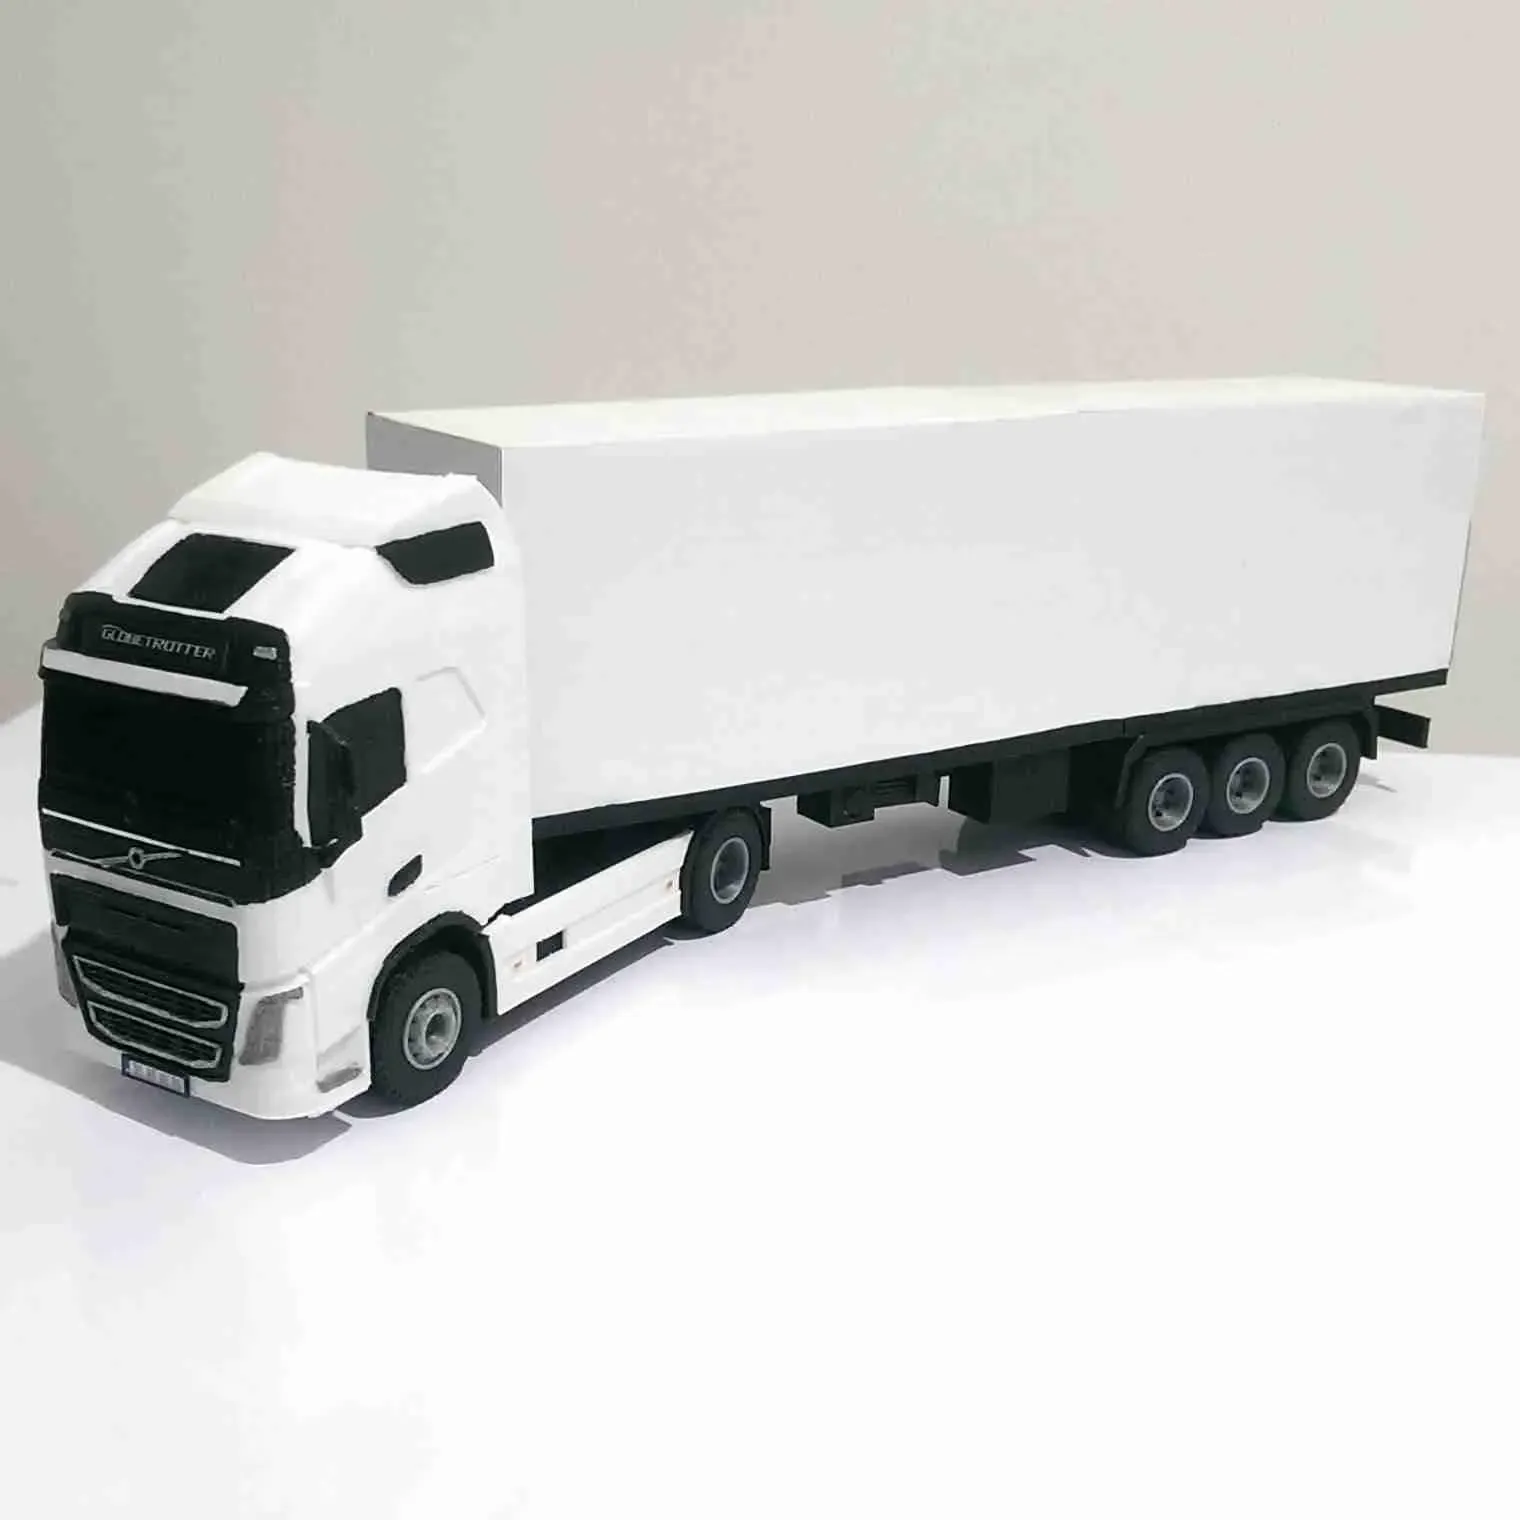 VOLVO TRUCK AND CAR TRANSPORT TRAILER